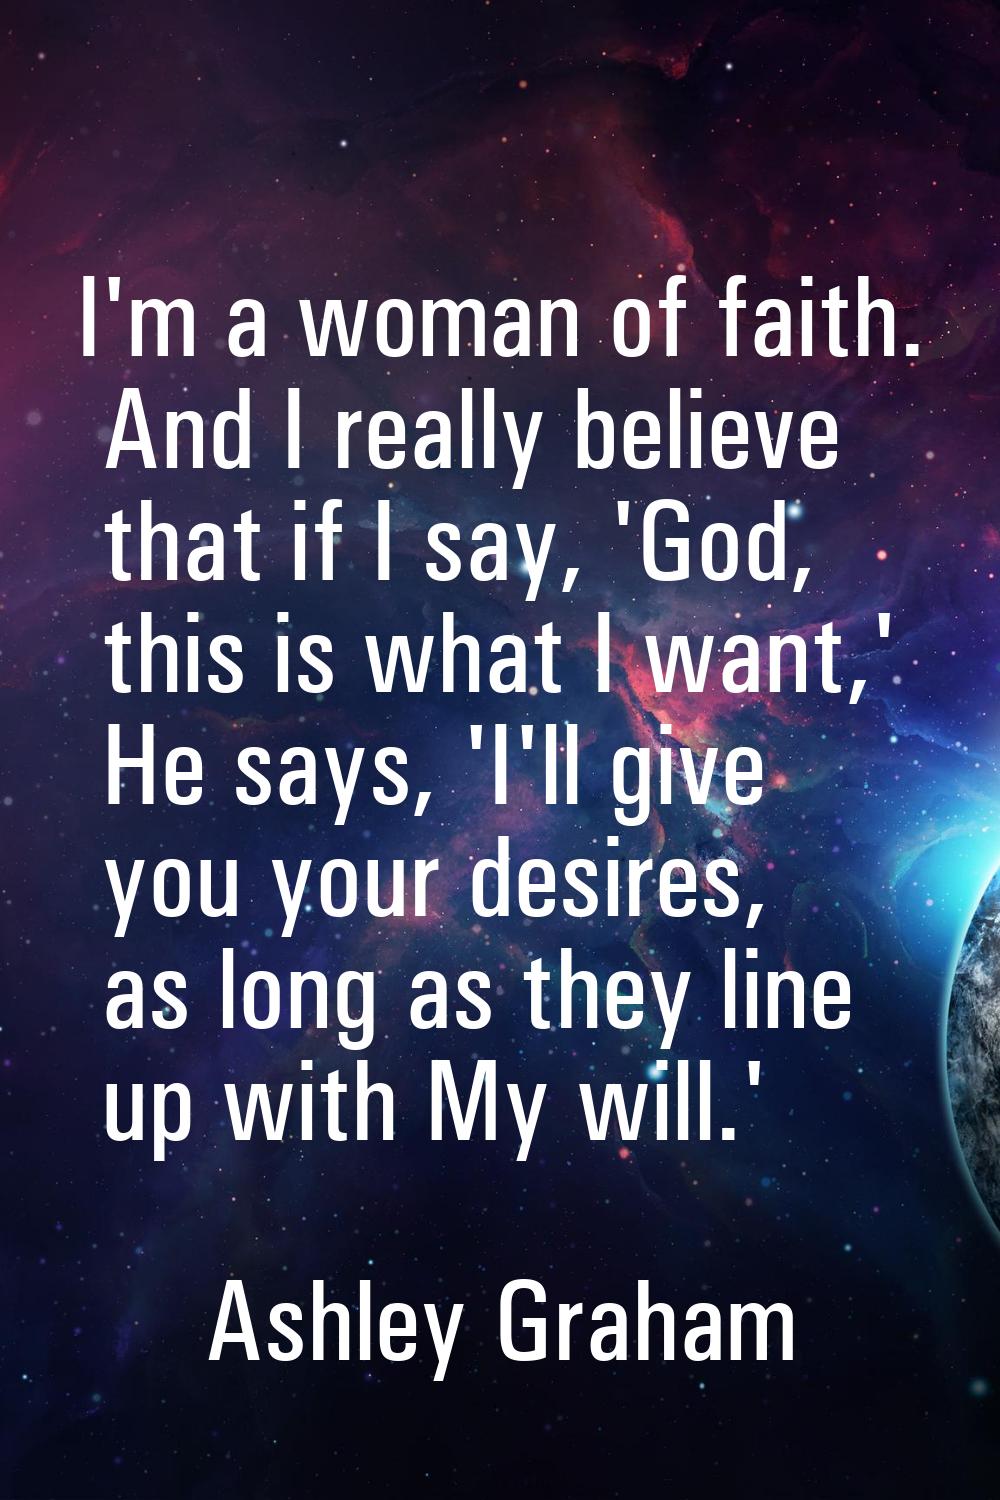 I'm a woman of faith. And I really believe that if I say, 'God, this is what I want,' He says, 'I'l